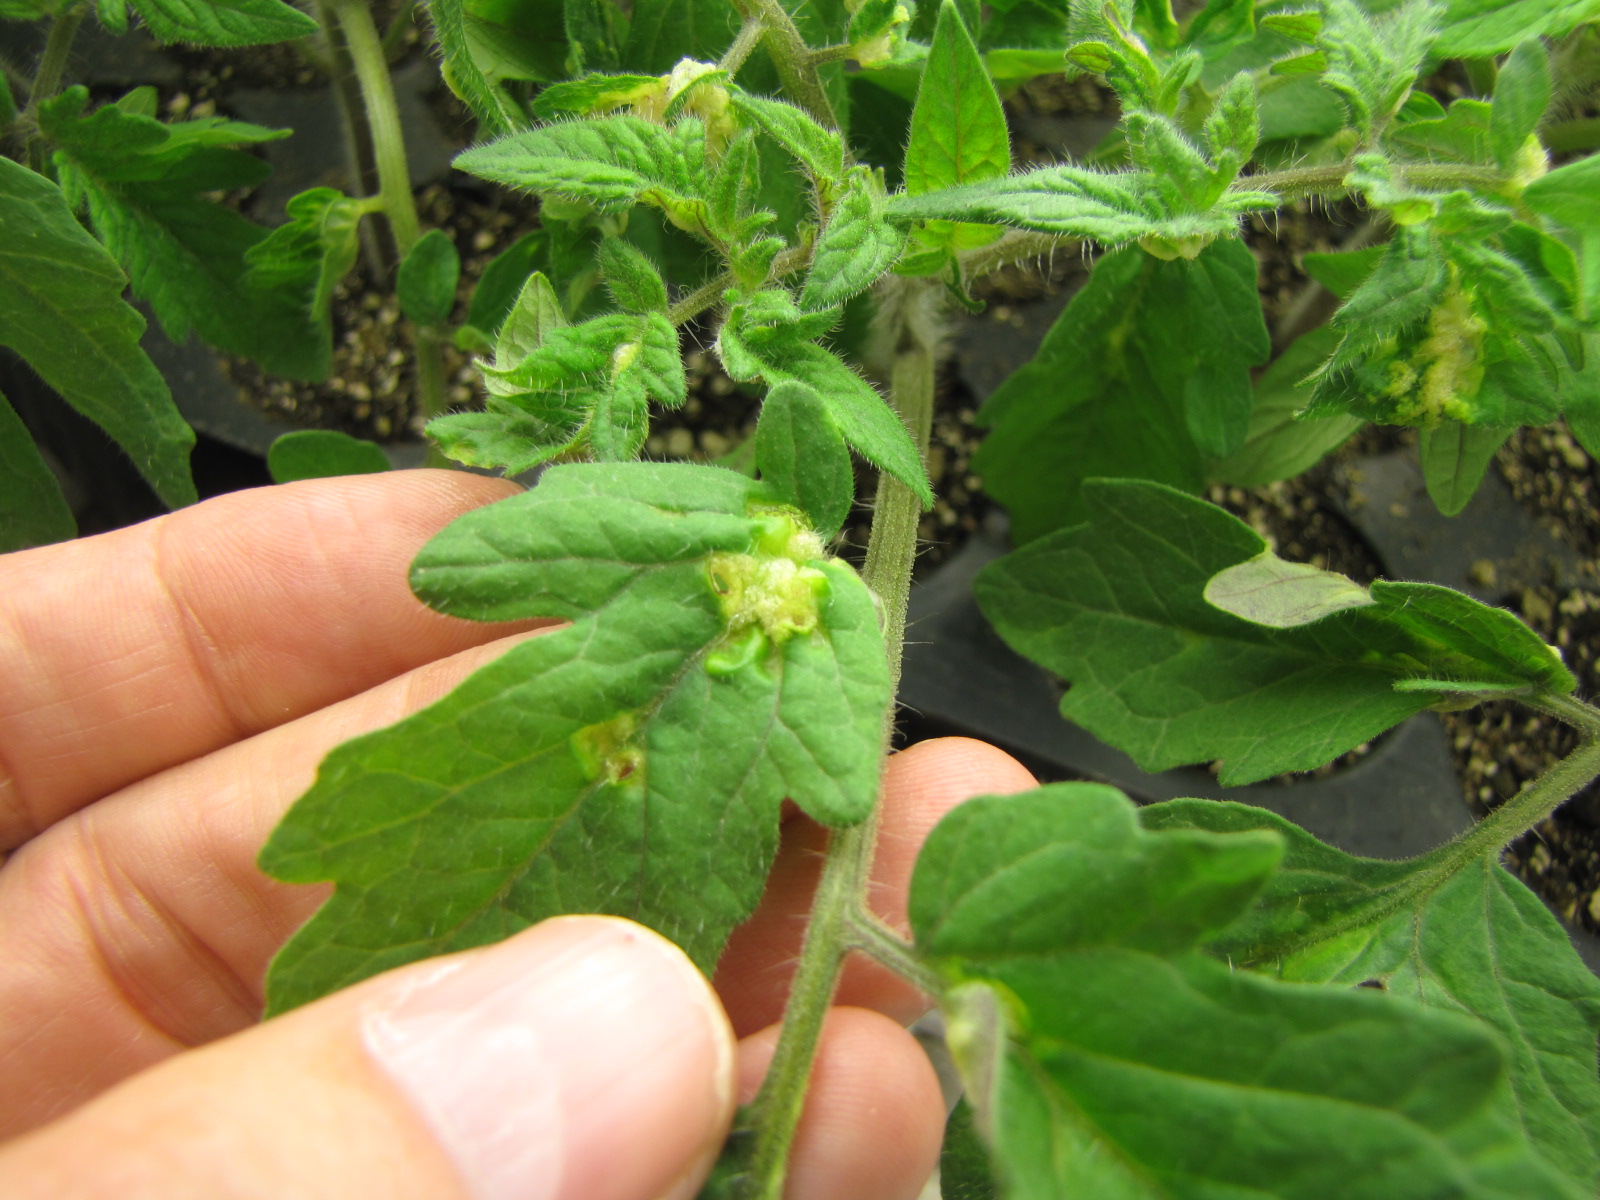 Figure 4. Intumescence on tomato leaves in a growth chamber.